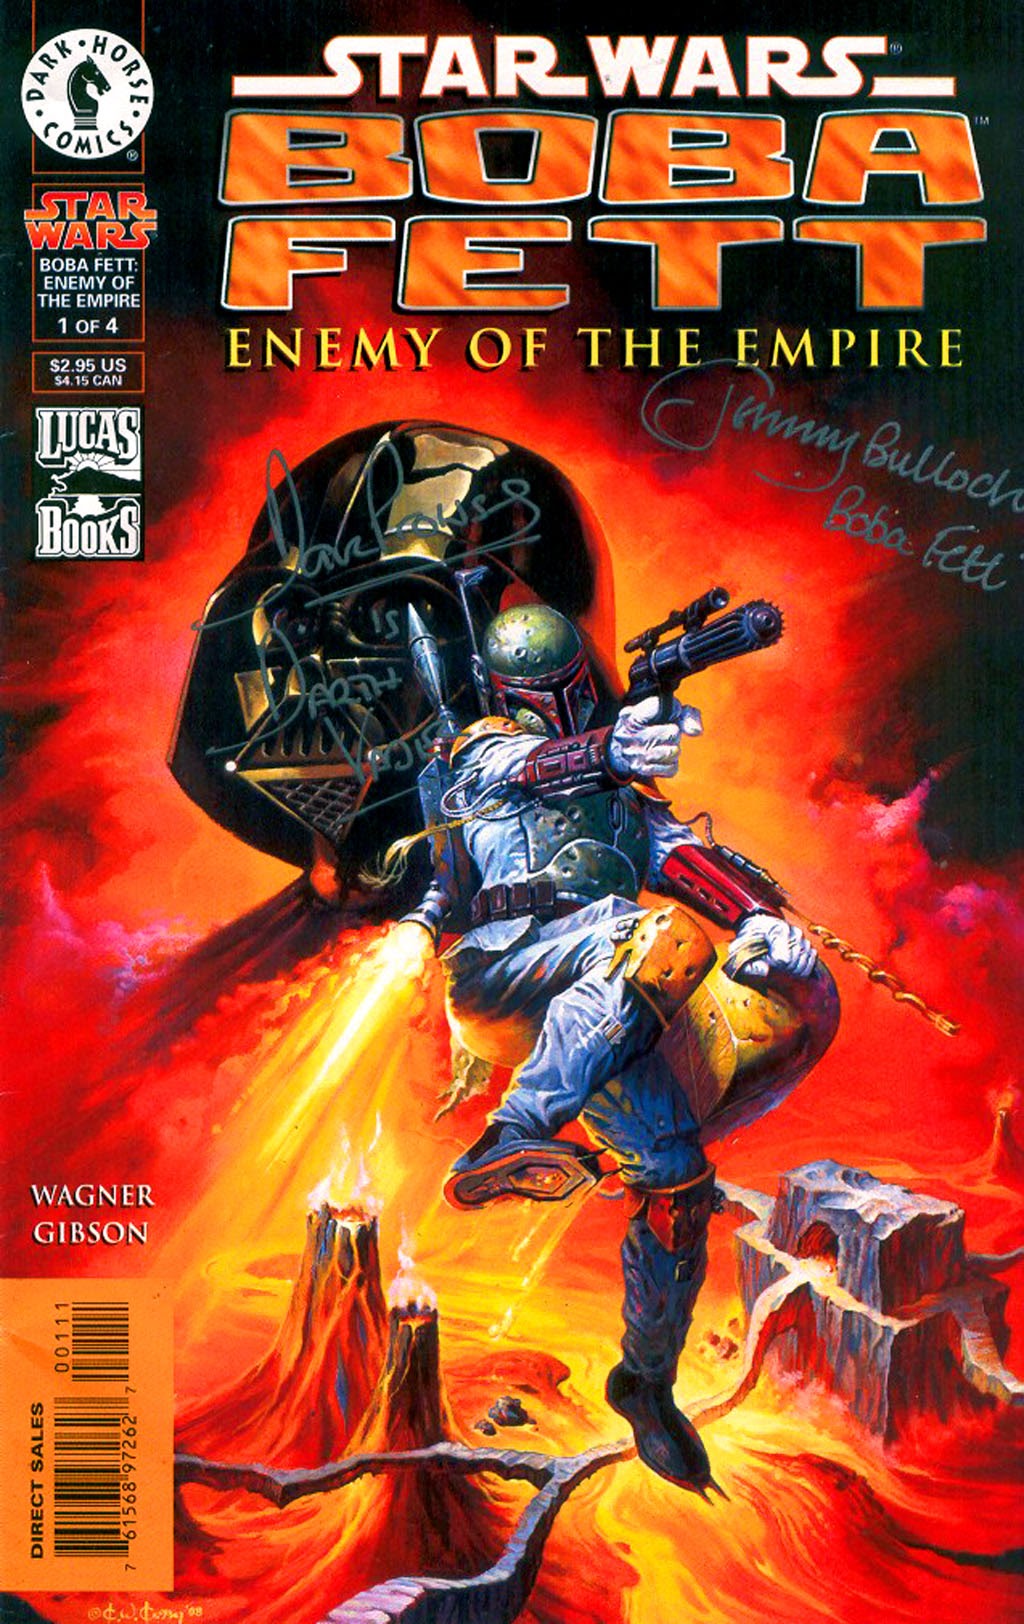 Read online Star Wars: Boba Fett - Enemy of the Empire comic -  Issue #1 - 1